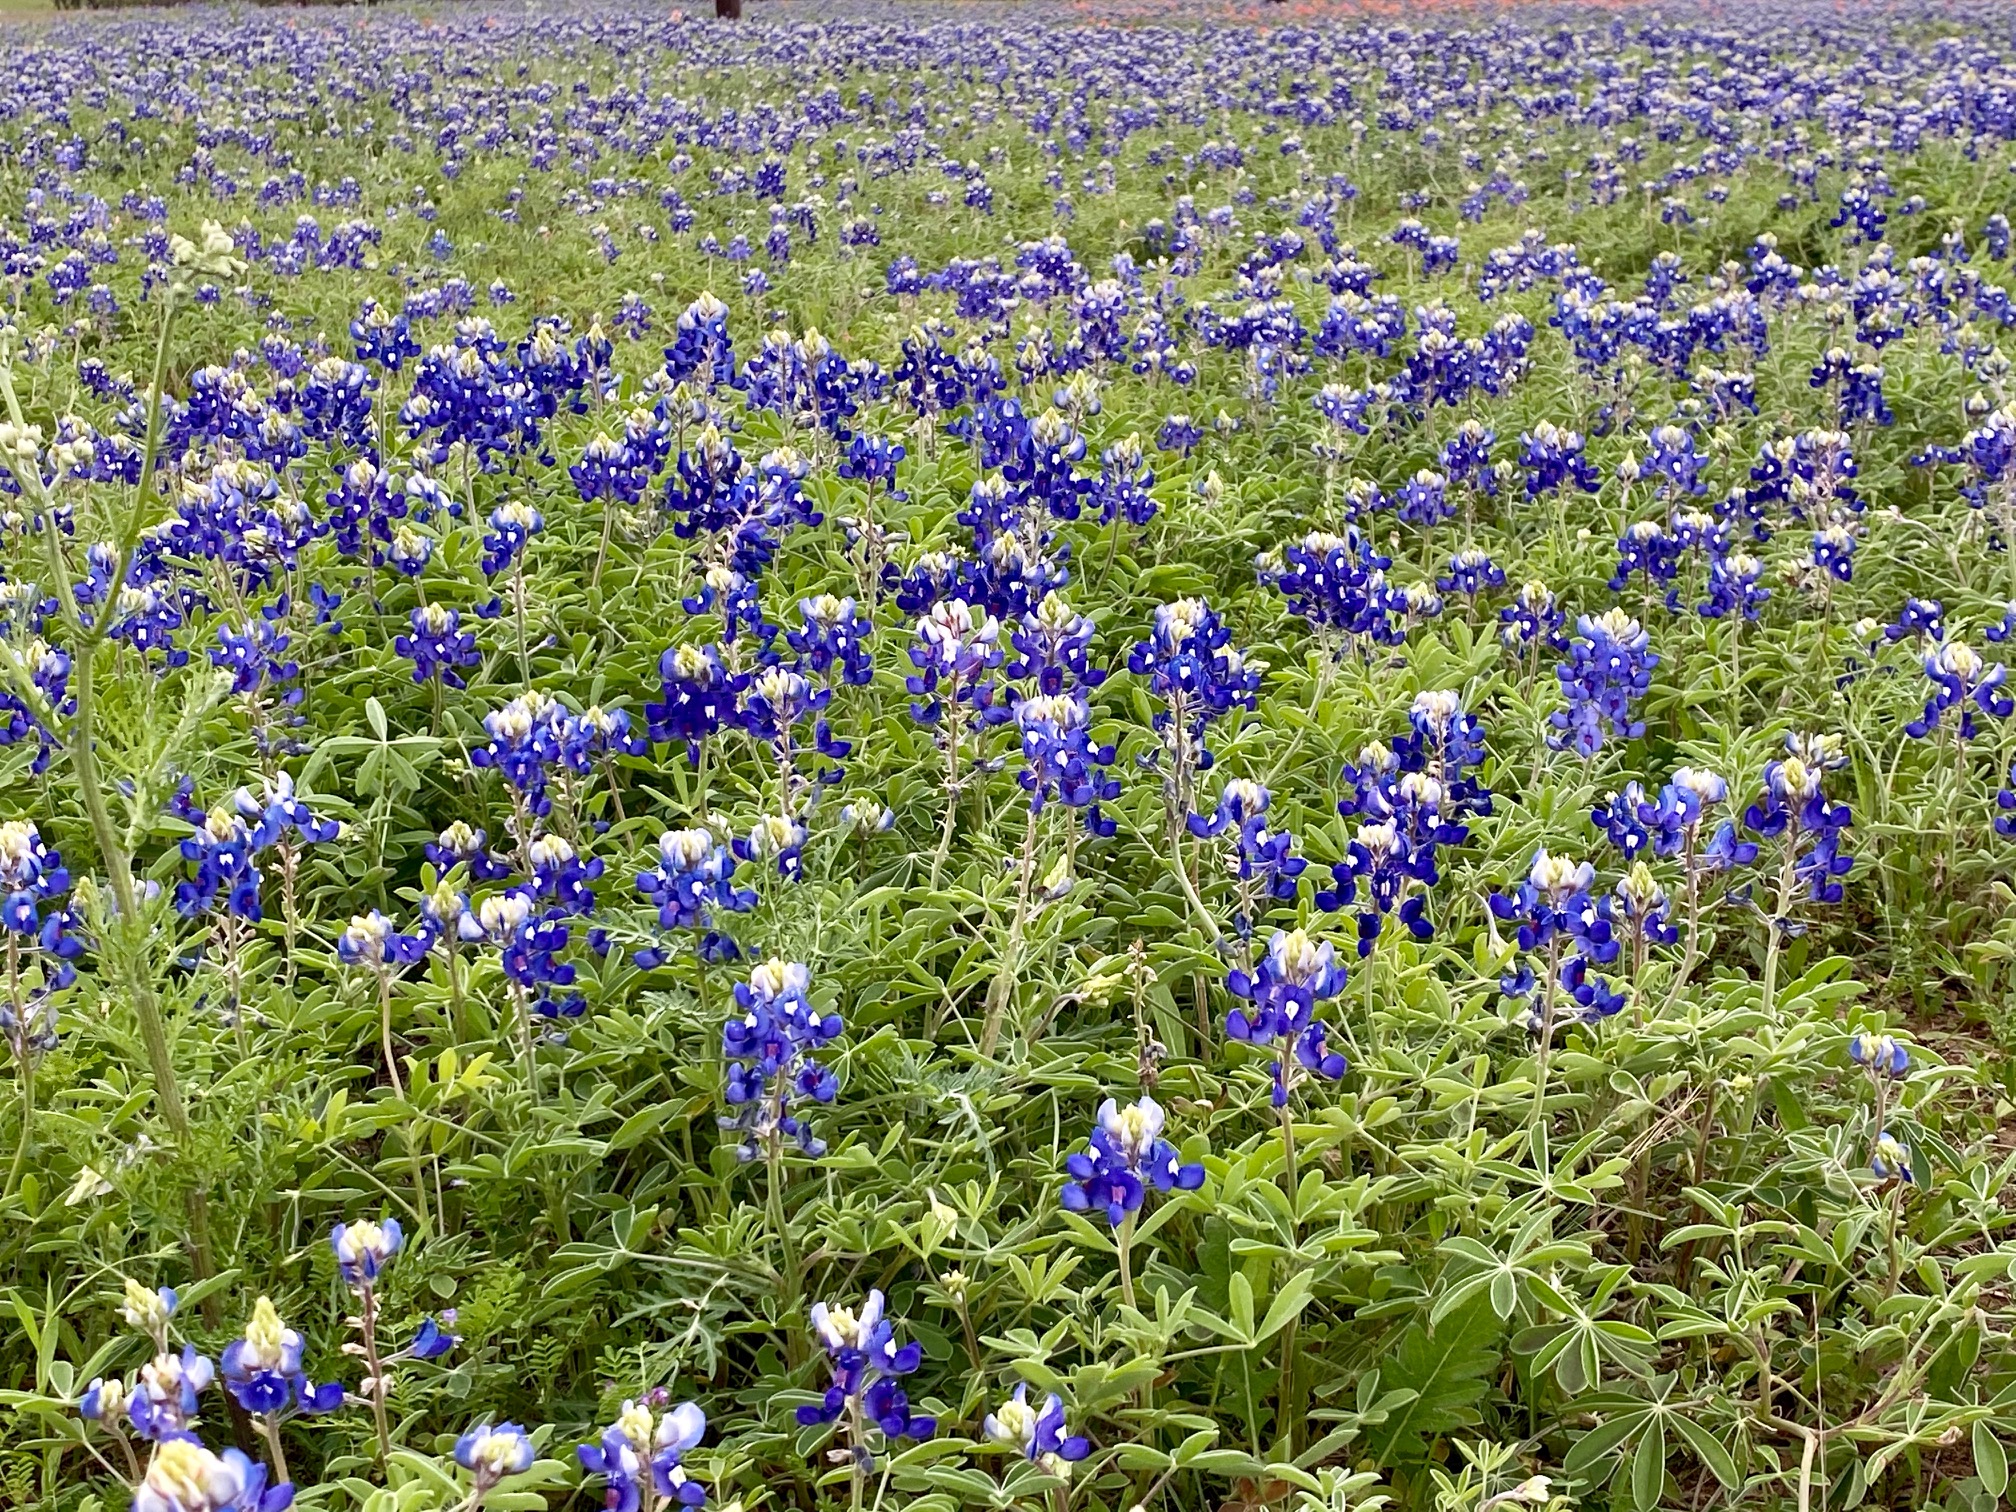 Wildflowers along Highway 90 A from Gonzales to Seguin